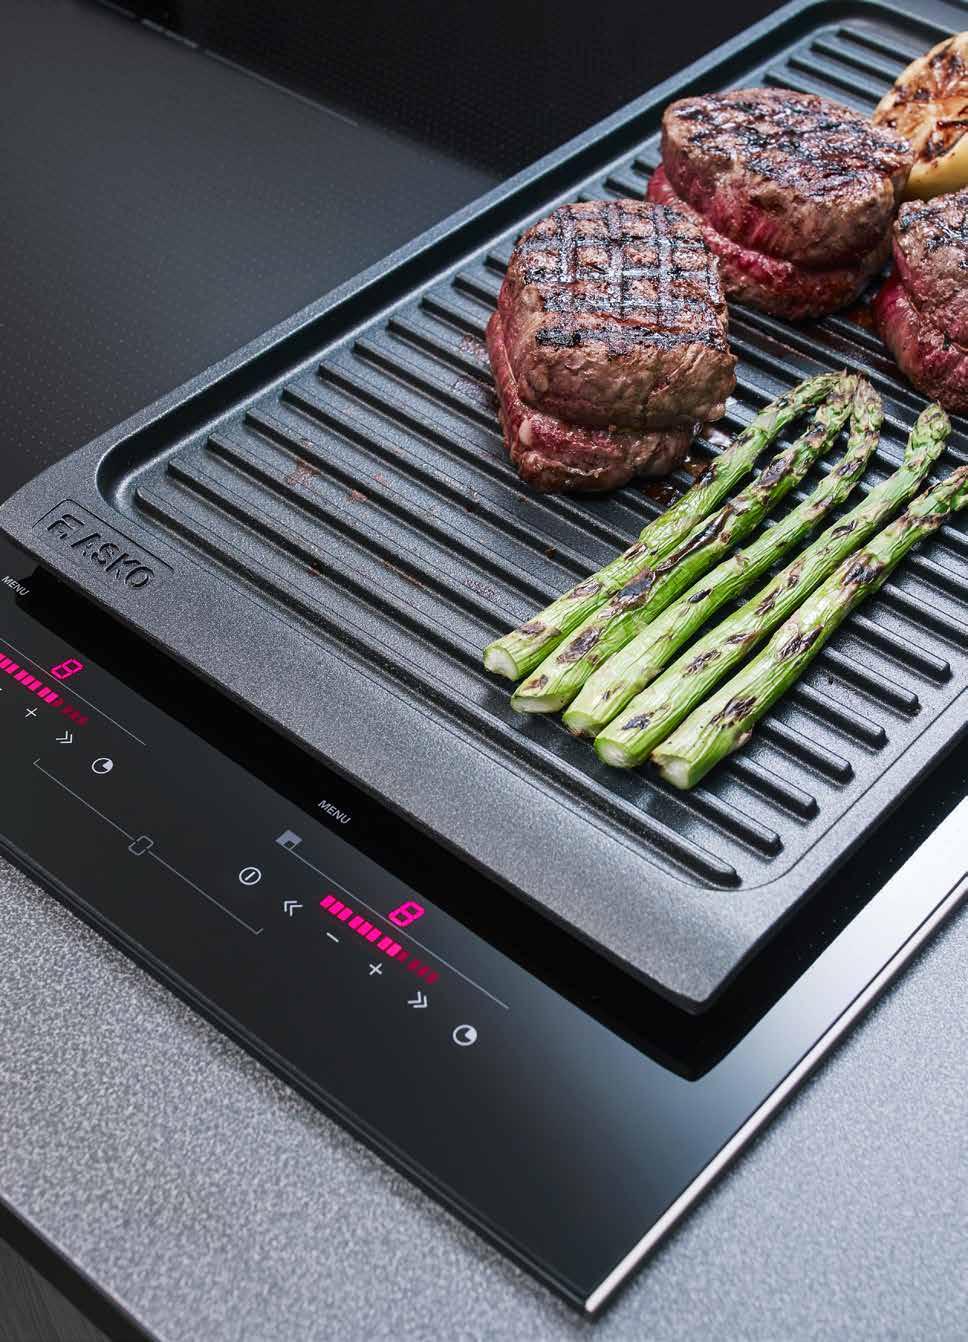 Bridge induction Extended range with Bridge Induction ASKO s flexible Bridge Induction zones let you bridge two cooking zones to create one large cooking zone, allowing you to optimise your